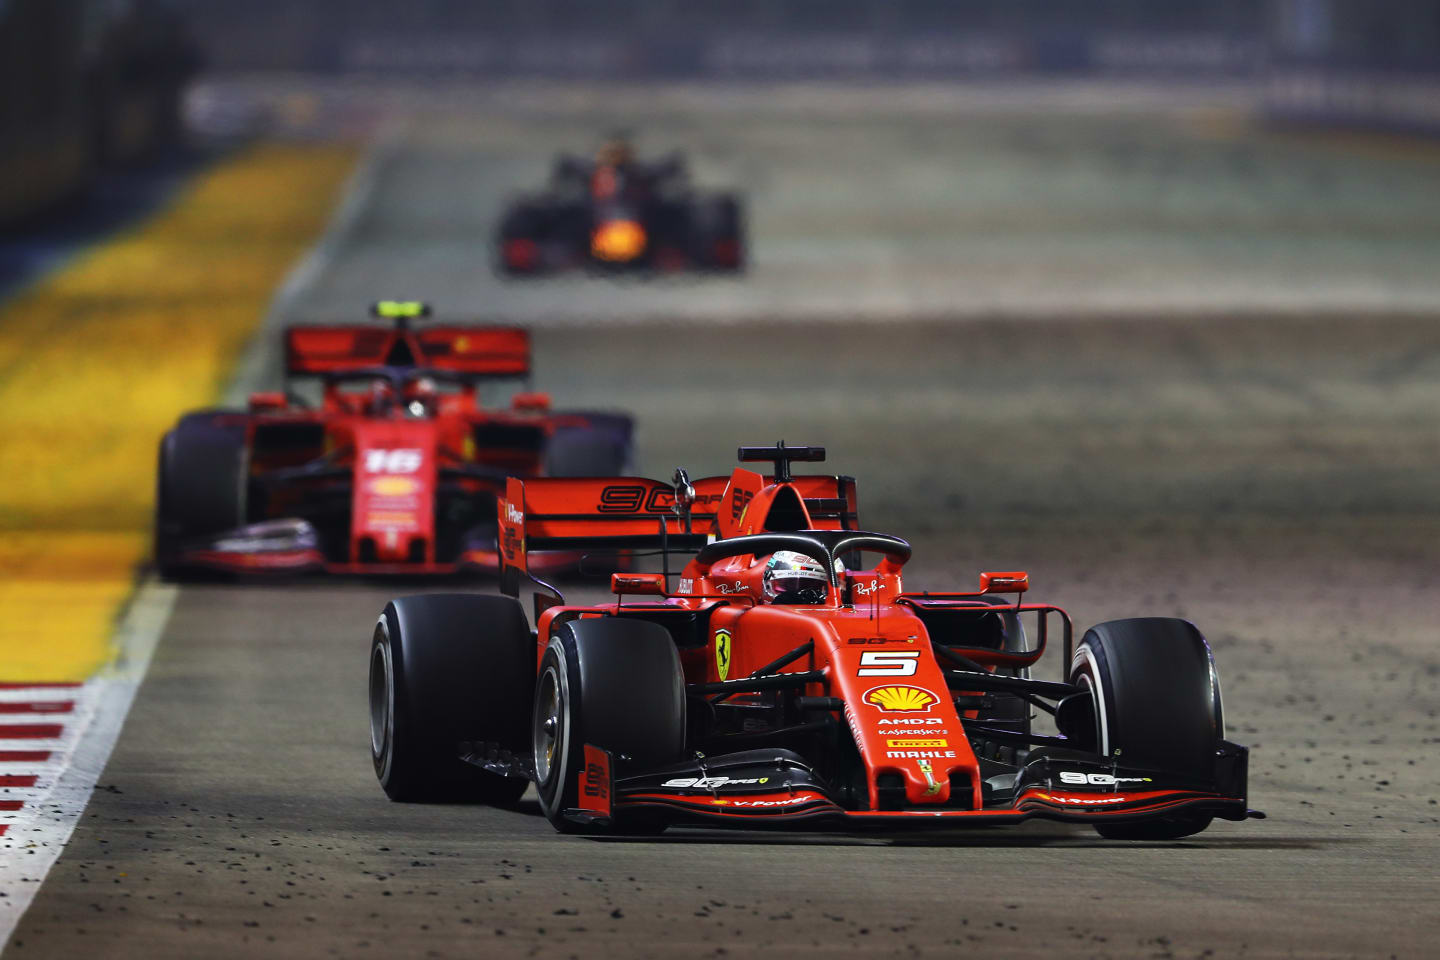 SINGAPORE, SINGAPORE - SEPTEMBER 22: Sebastian Vettel of Germany driving the (5) Scuderia Ferrari SF90 leads Charles Leclerc of Monaco driving the (16) Scuderia Ferrari SF90 on track during the F1 Grand Prix of Singapore at Marina Bay Street Circuit on September 22, 2019 in Singapore. (Photo by Lars Baron/Getty Images)